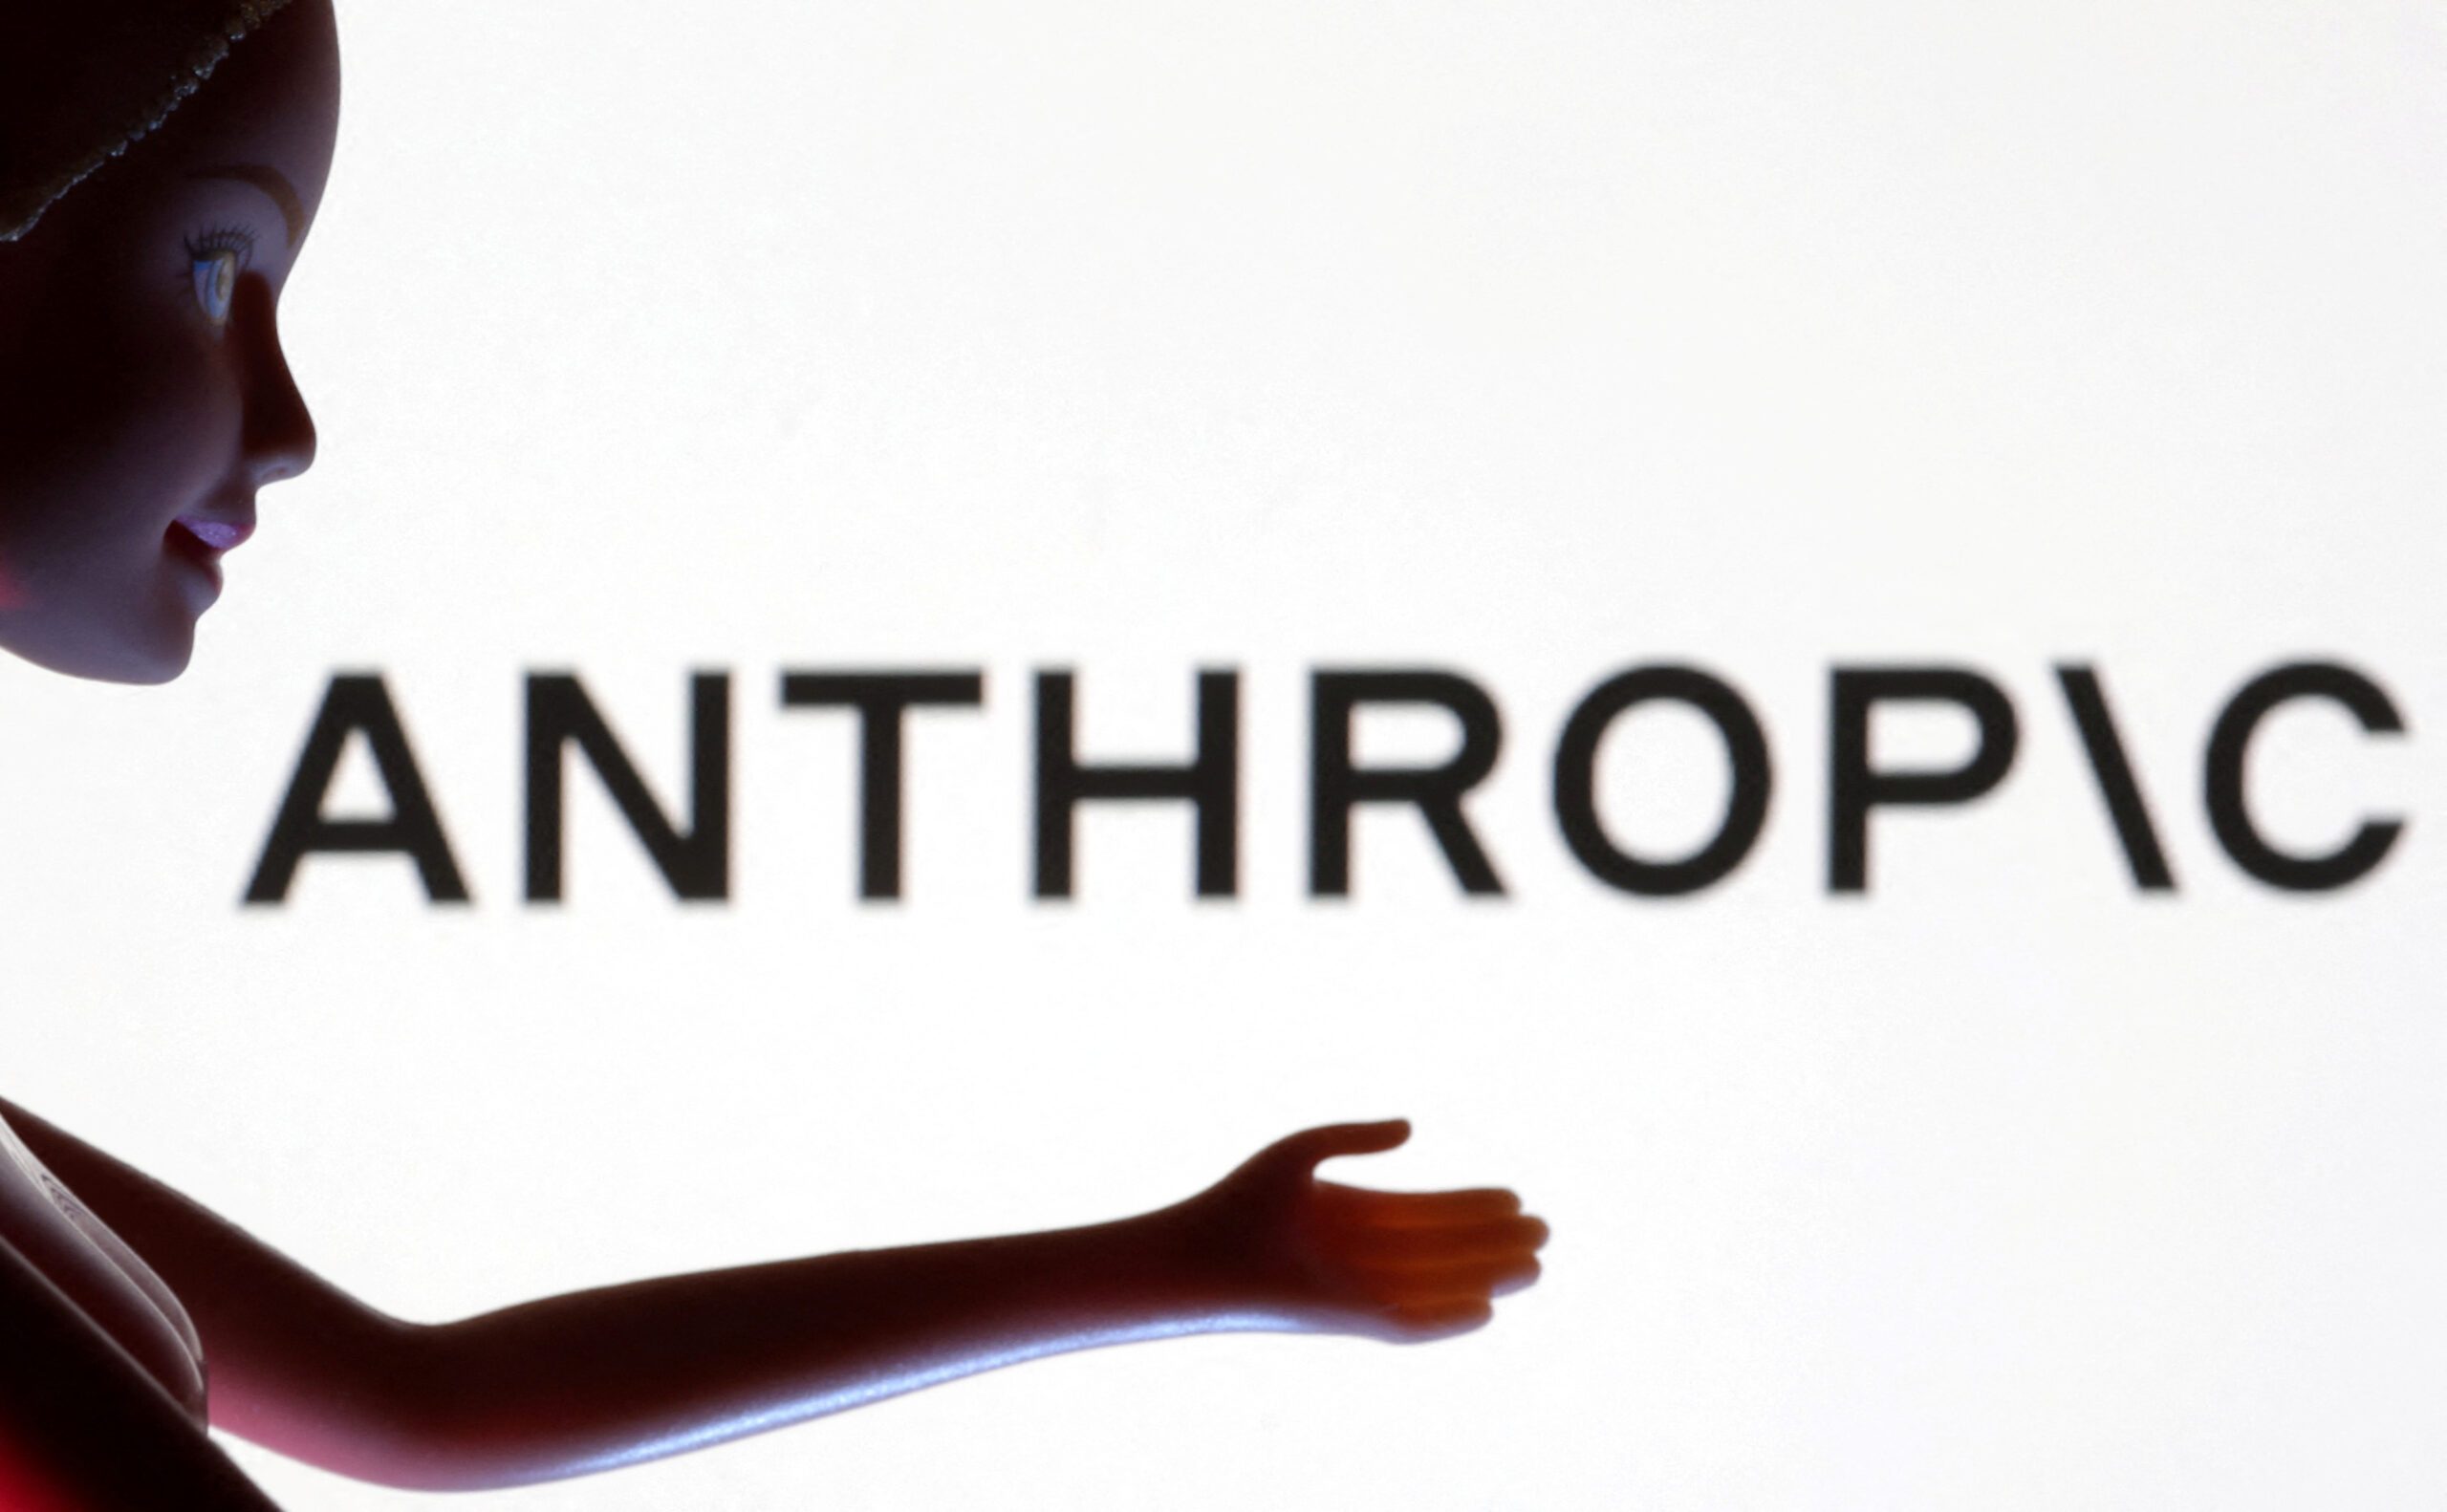 Anthropic seeks to raise $750m in funding round led by Menlo Ventures